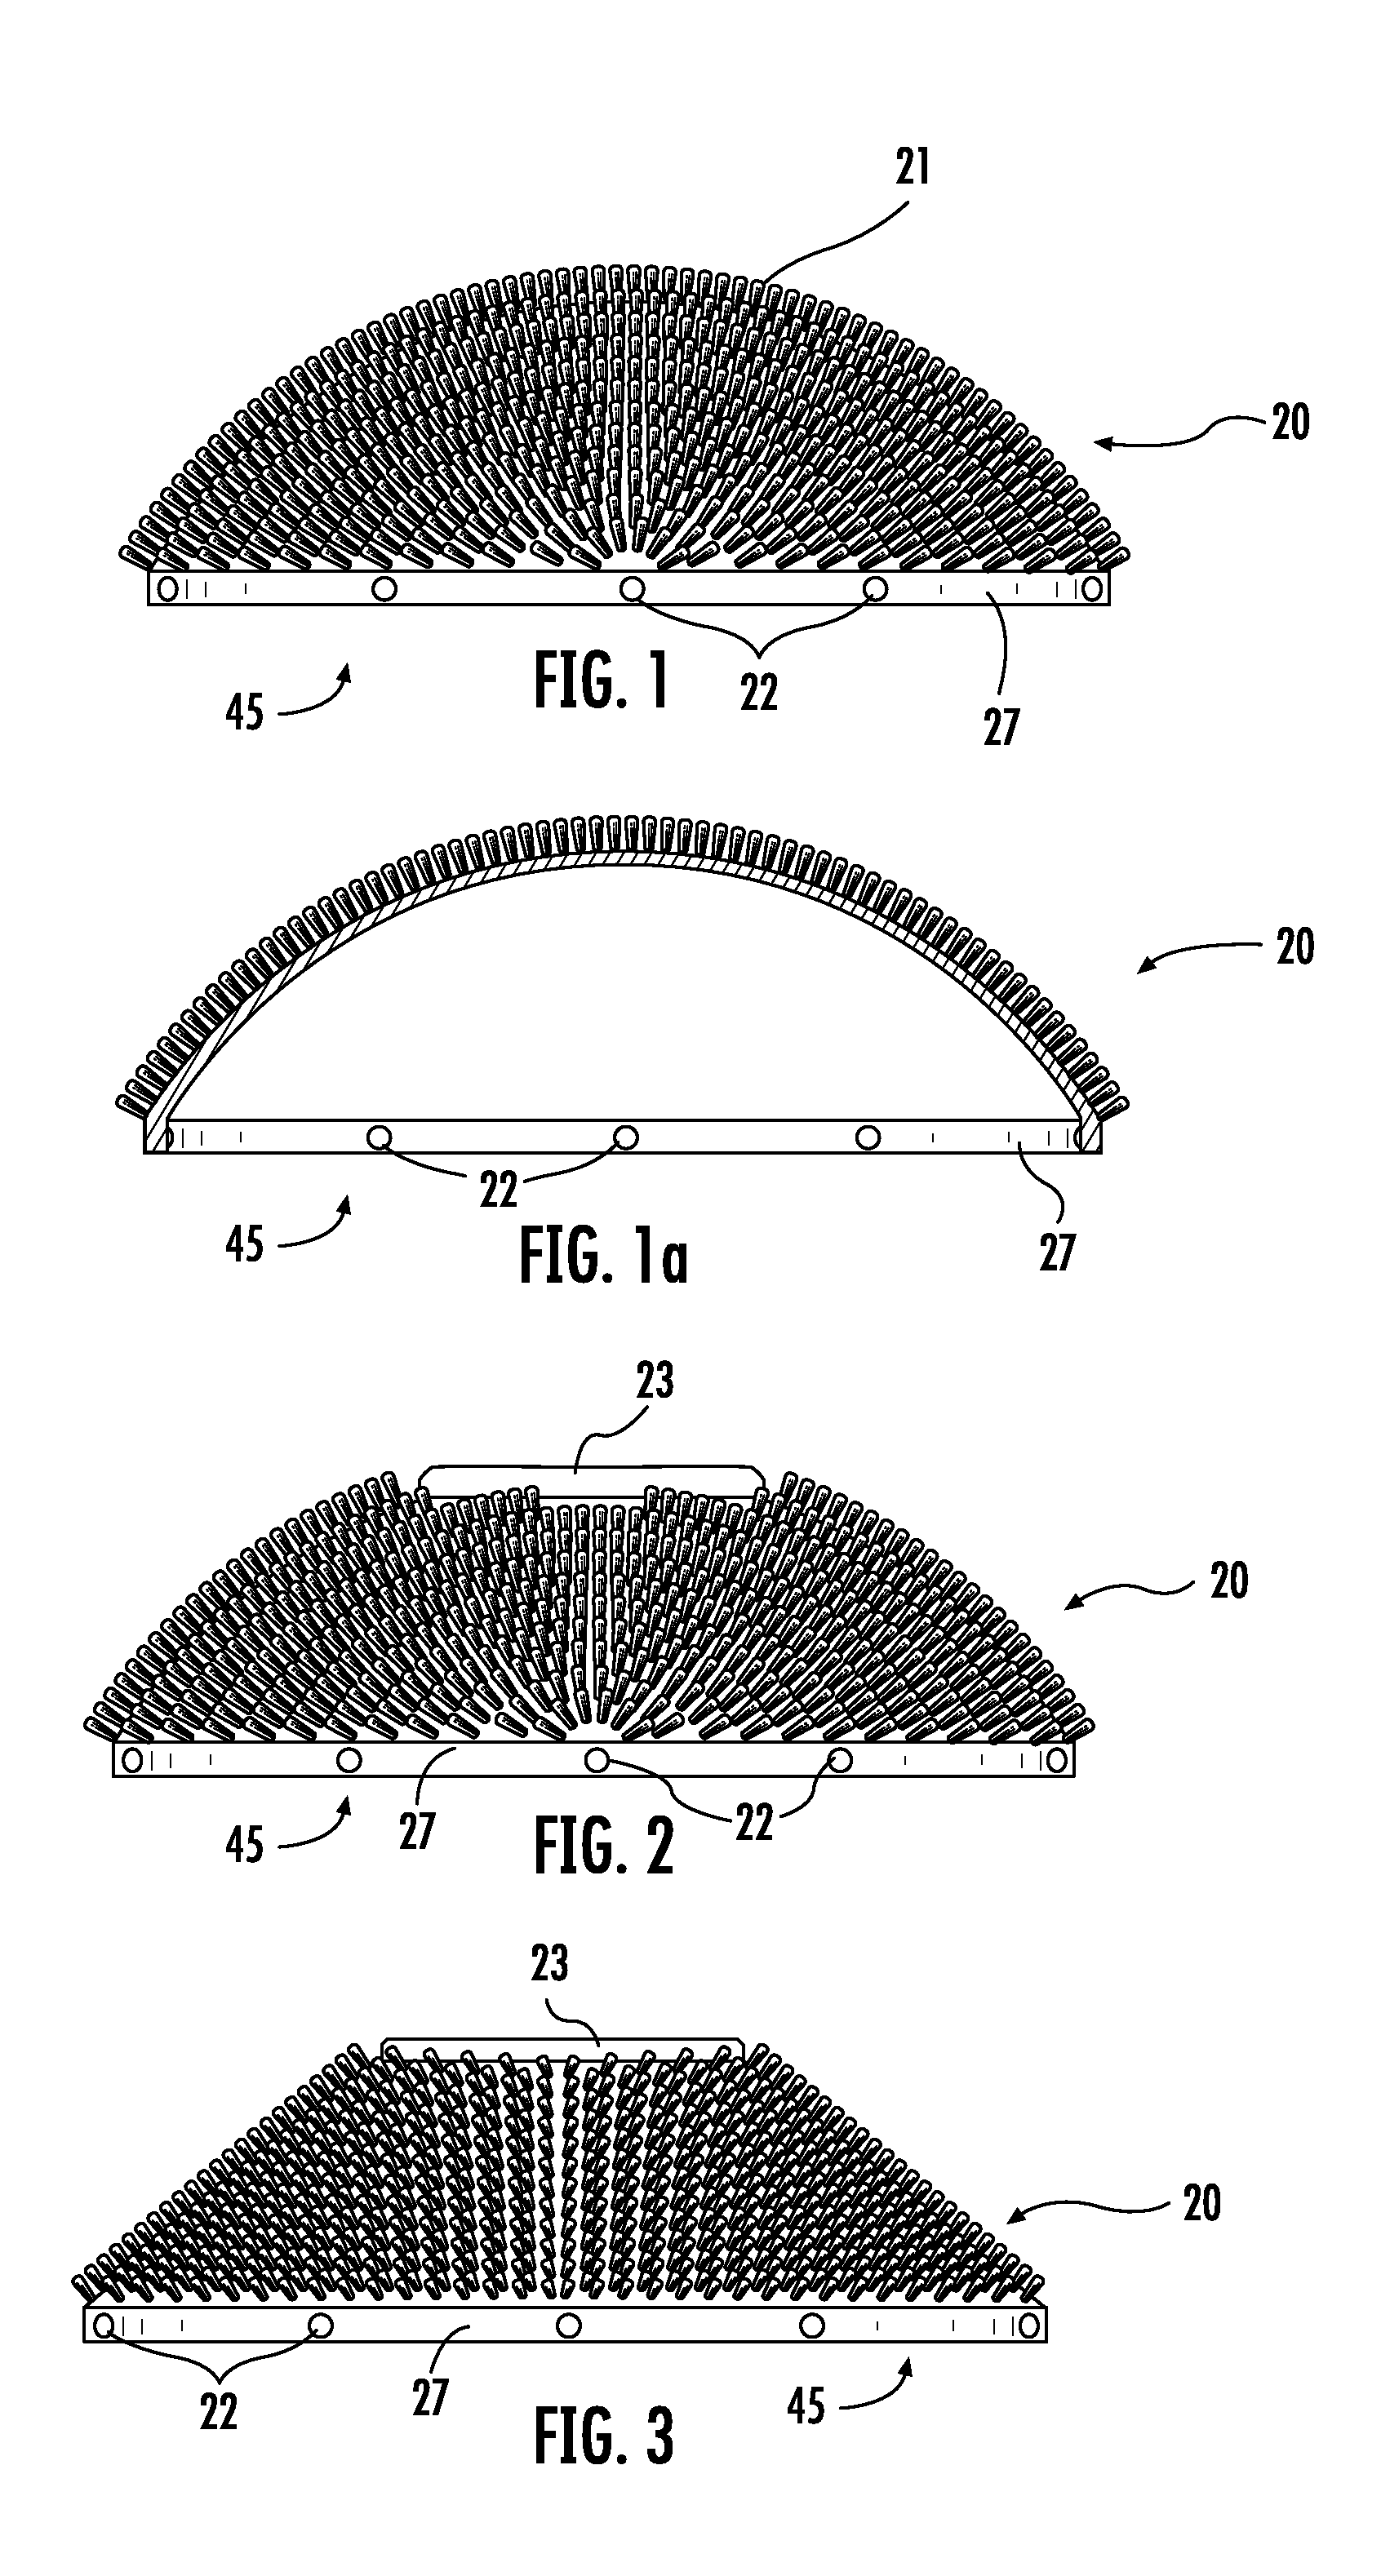 Golf equipment cleaning device and method of use